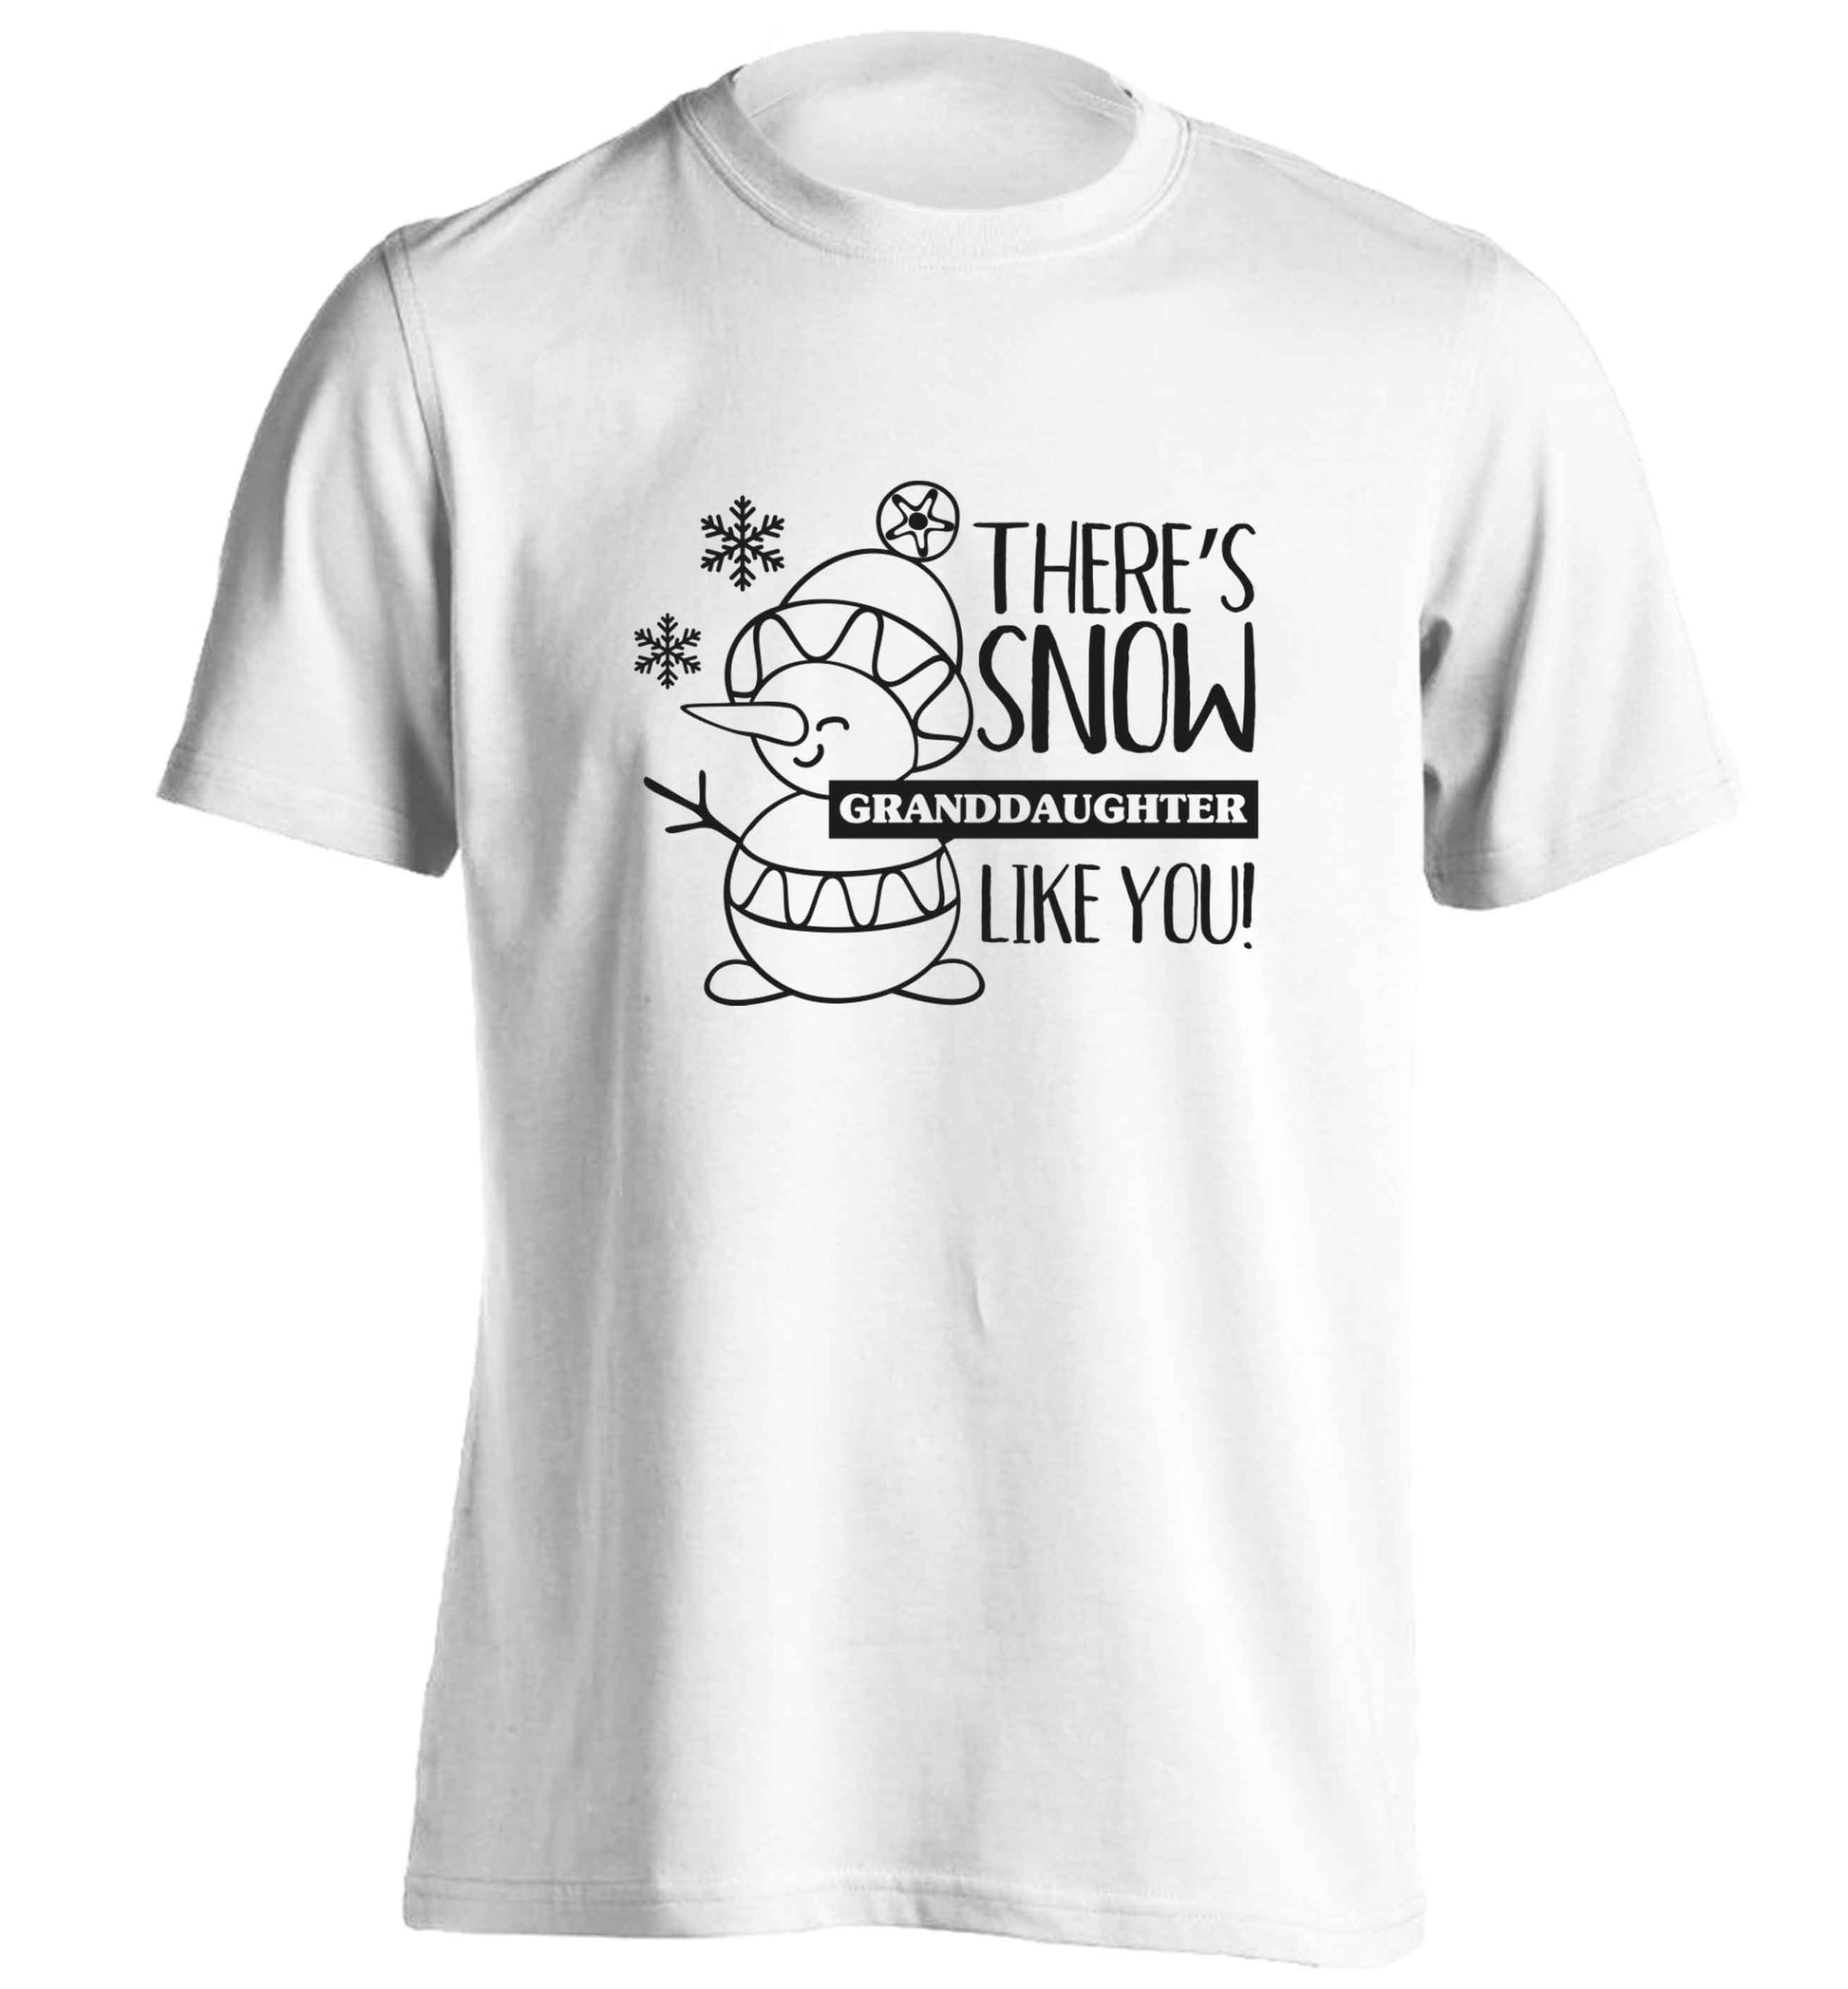 There's snow granddaughter like you adults unisex white Tshirt 2XL